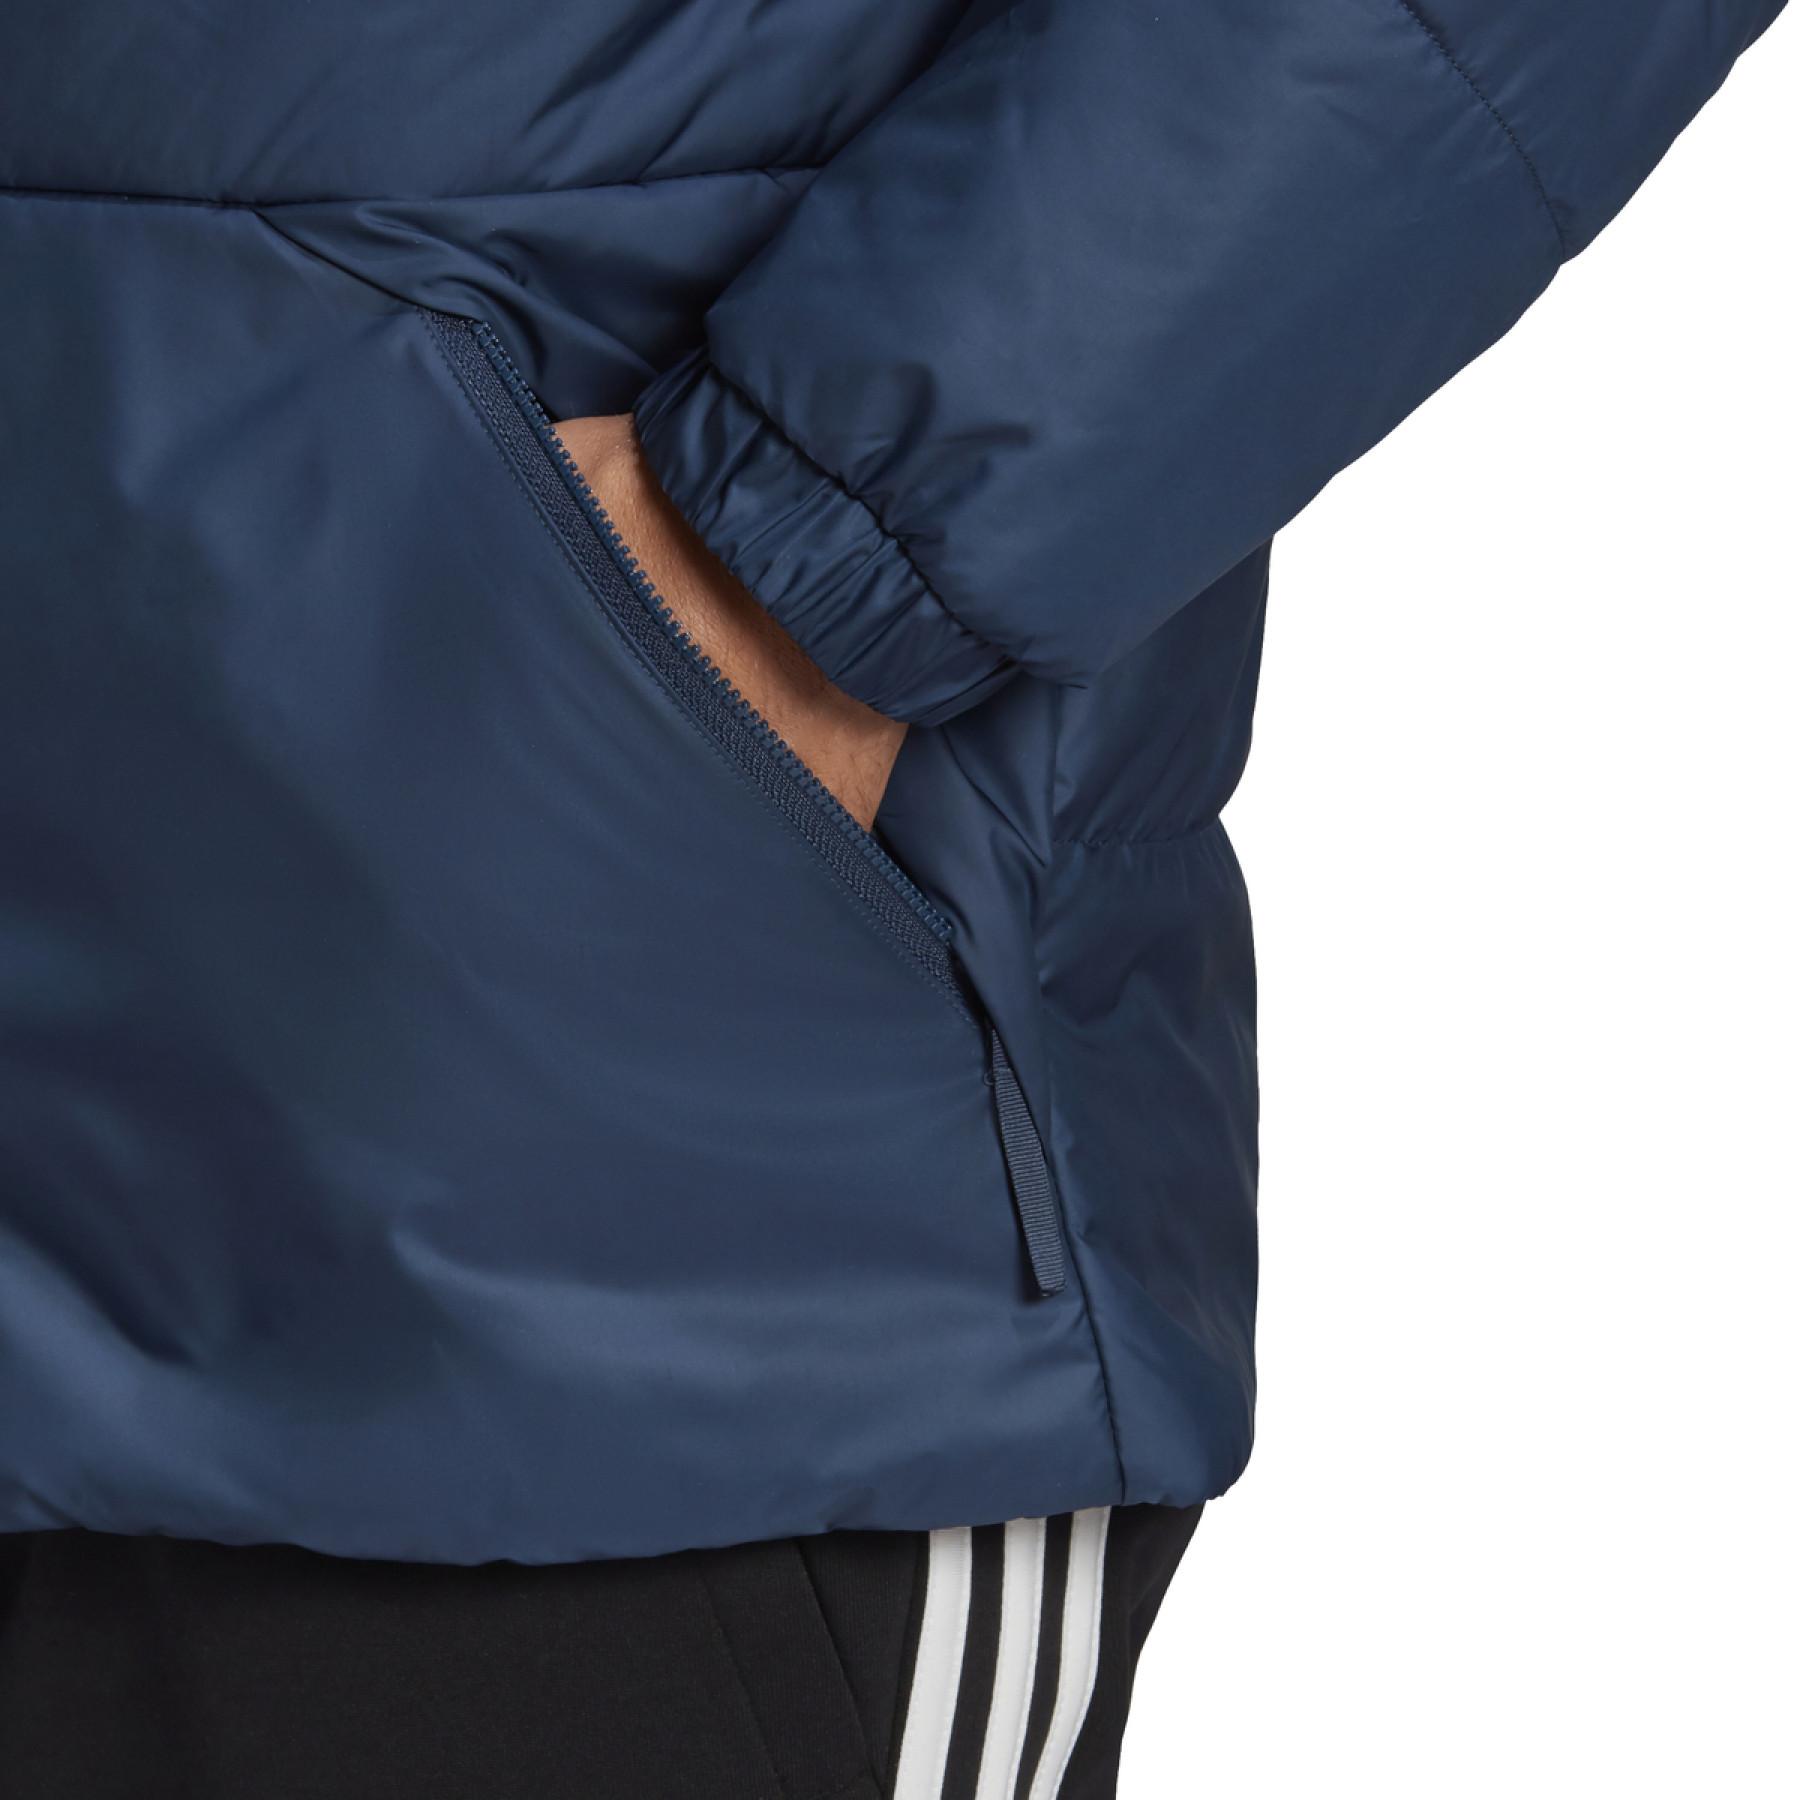 Jas adidas BSC 3-Bandes Insulated Winter